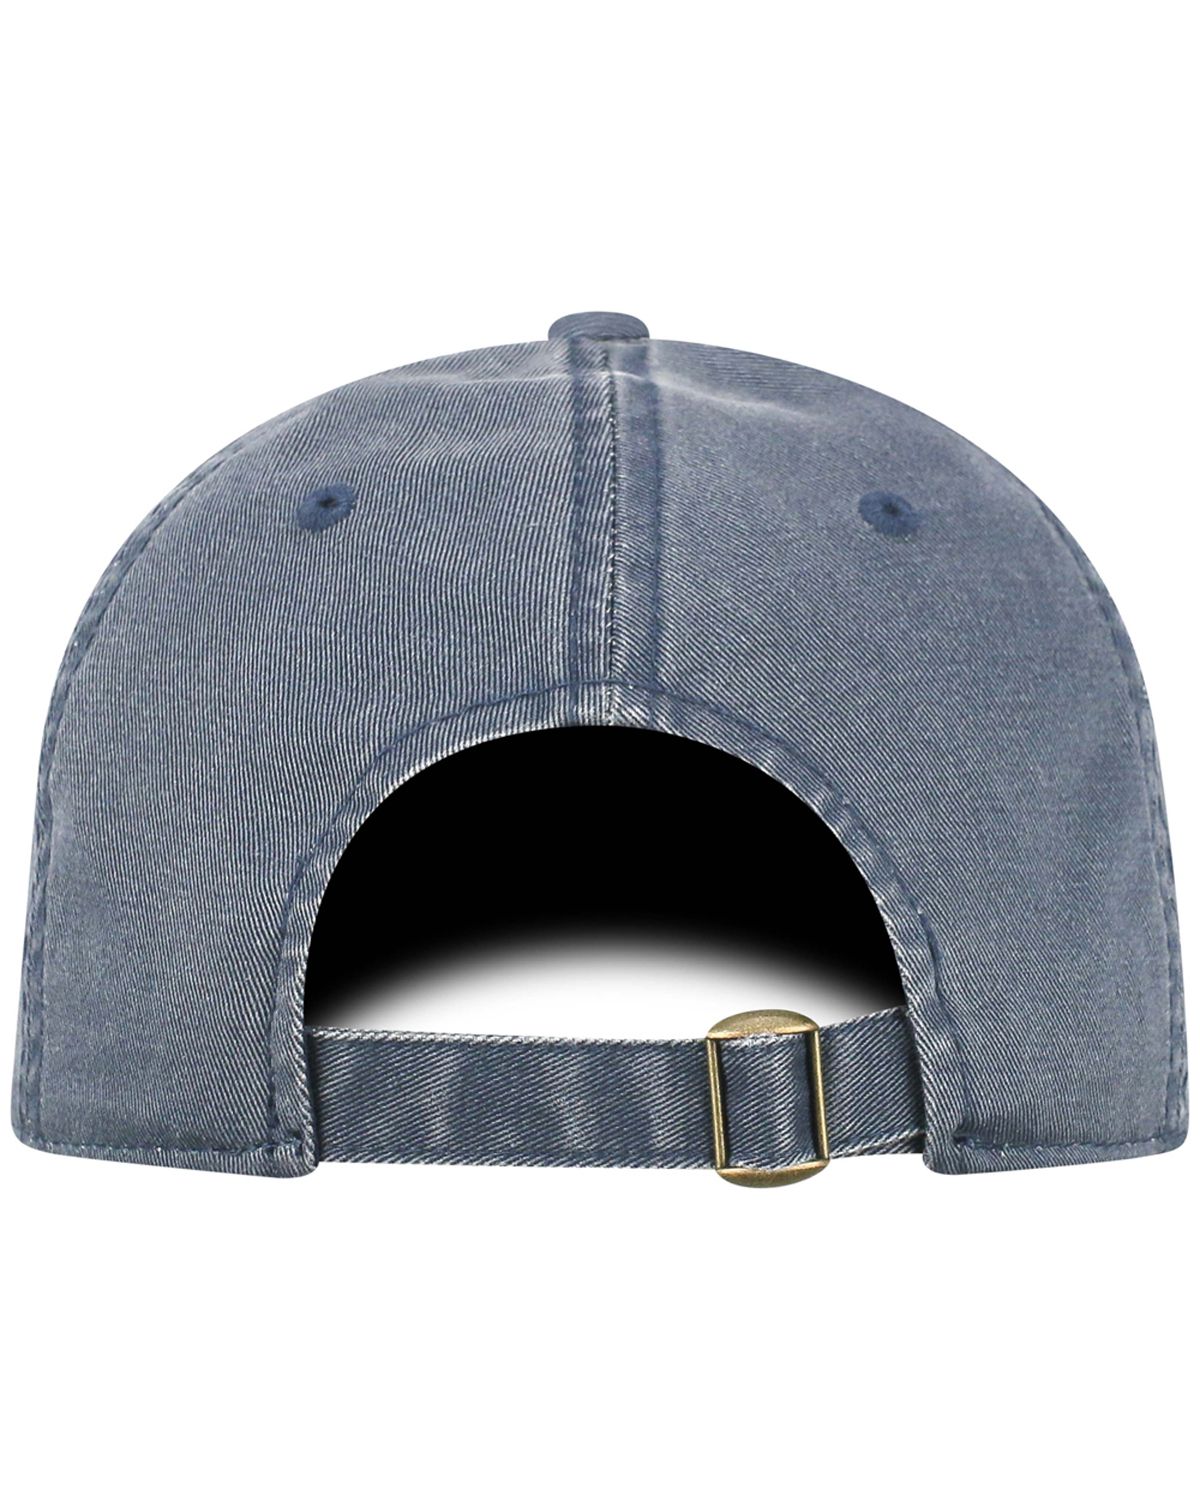 'Top Of The World TW5516 Adult Park Cap'